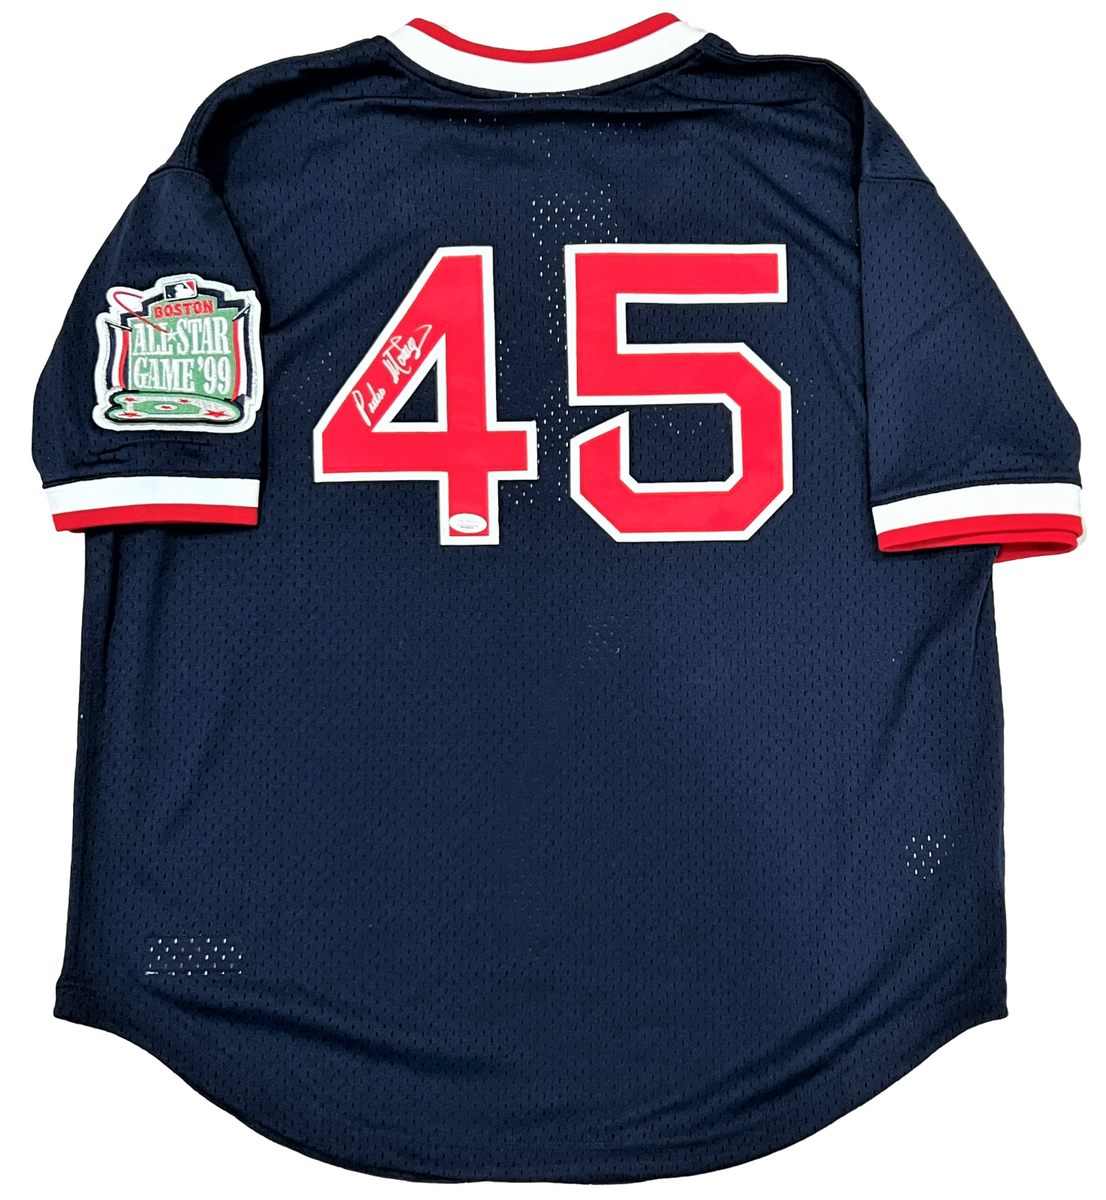 Pedro Martinez Boston Red Sox Mitchell & Ness 1999 Cooperstown Collection  Mesh Batting Practice Jersey - Navy Mlb - Bluefink